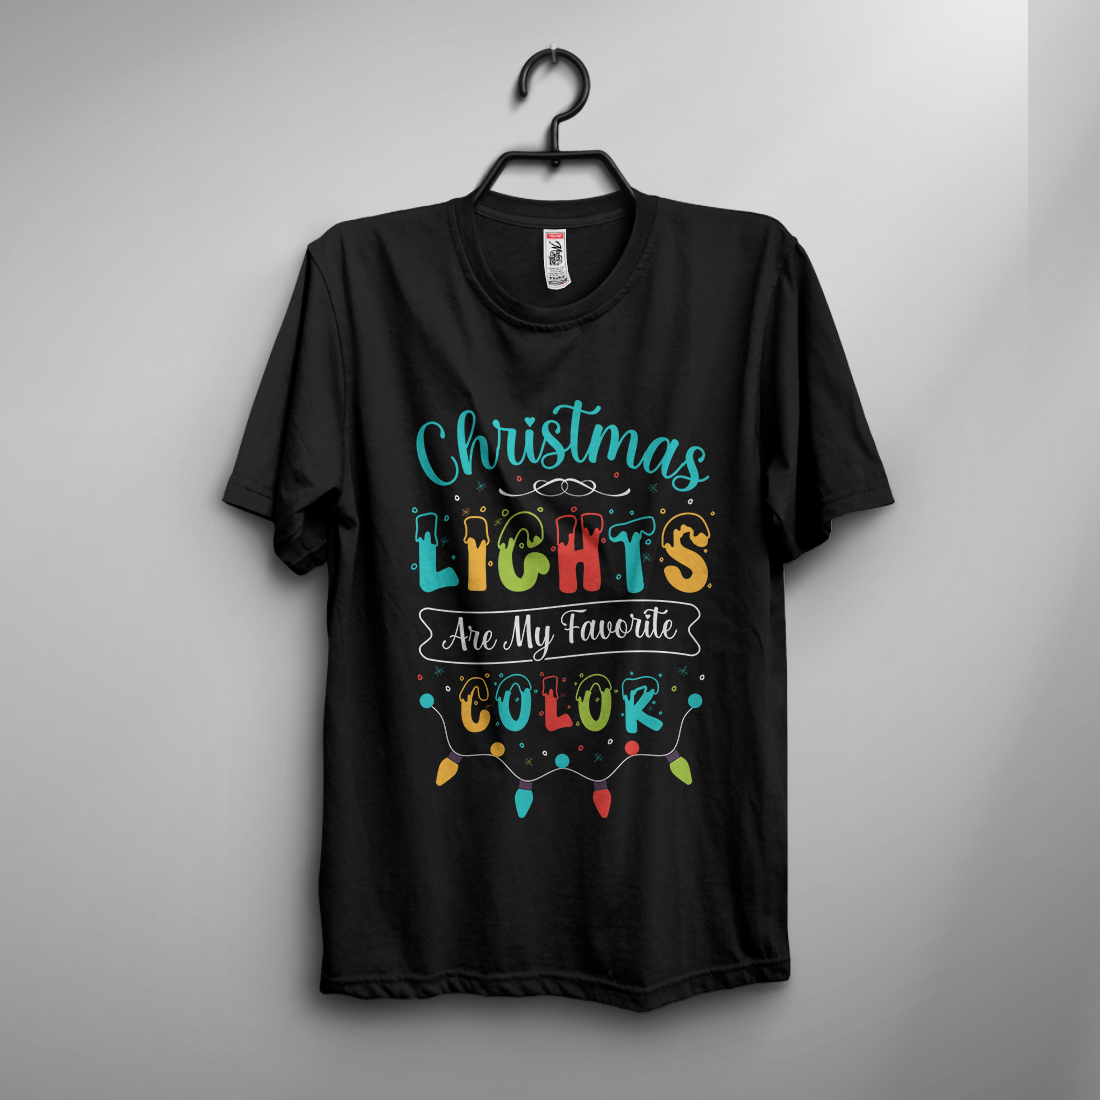 Christmas lights are my favorite color T-shirt design cover image.